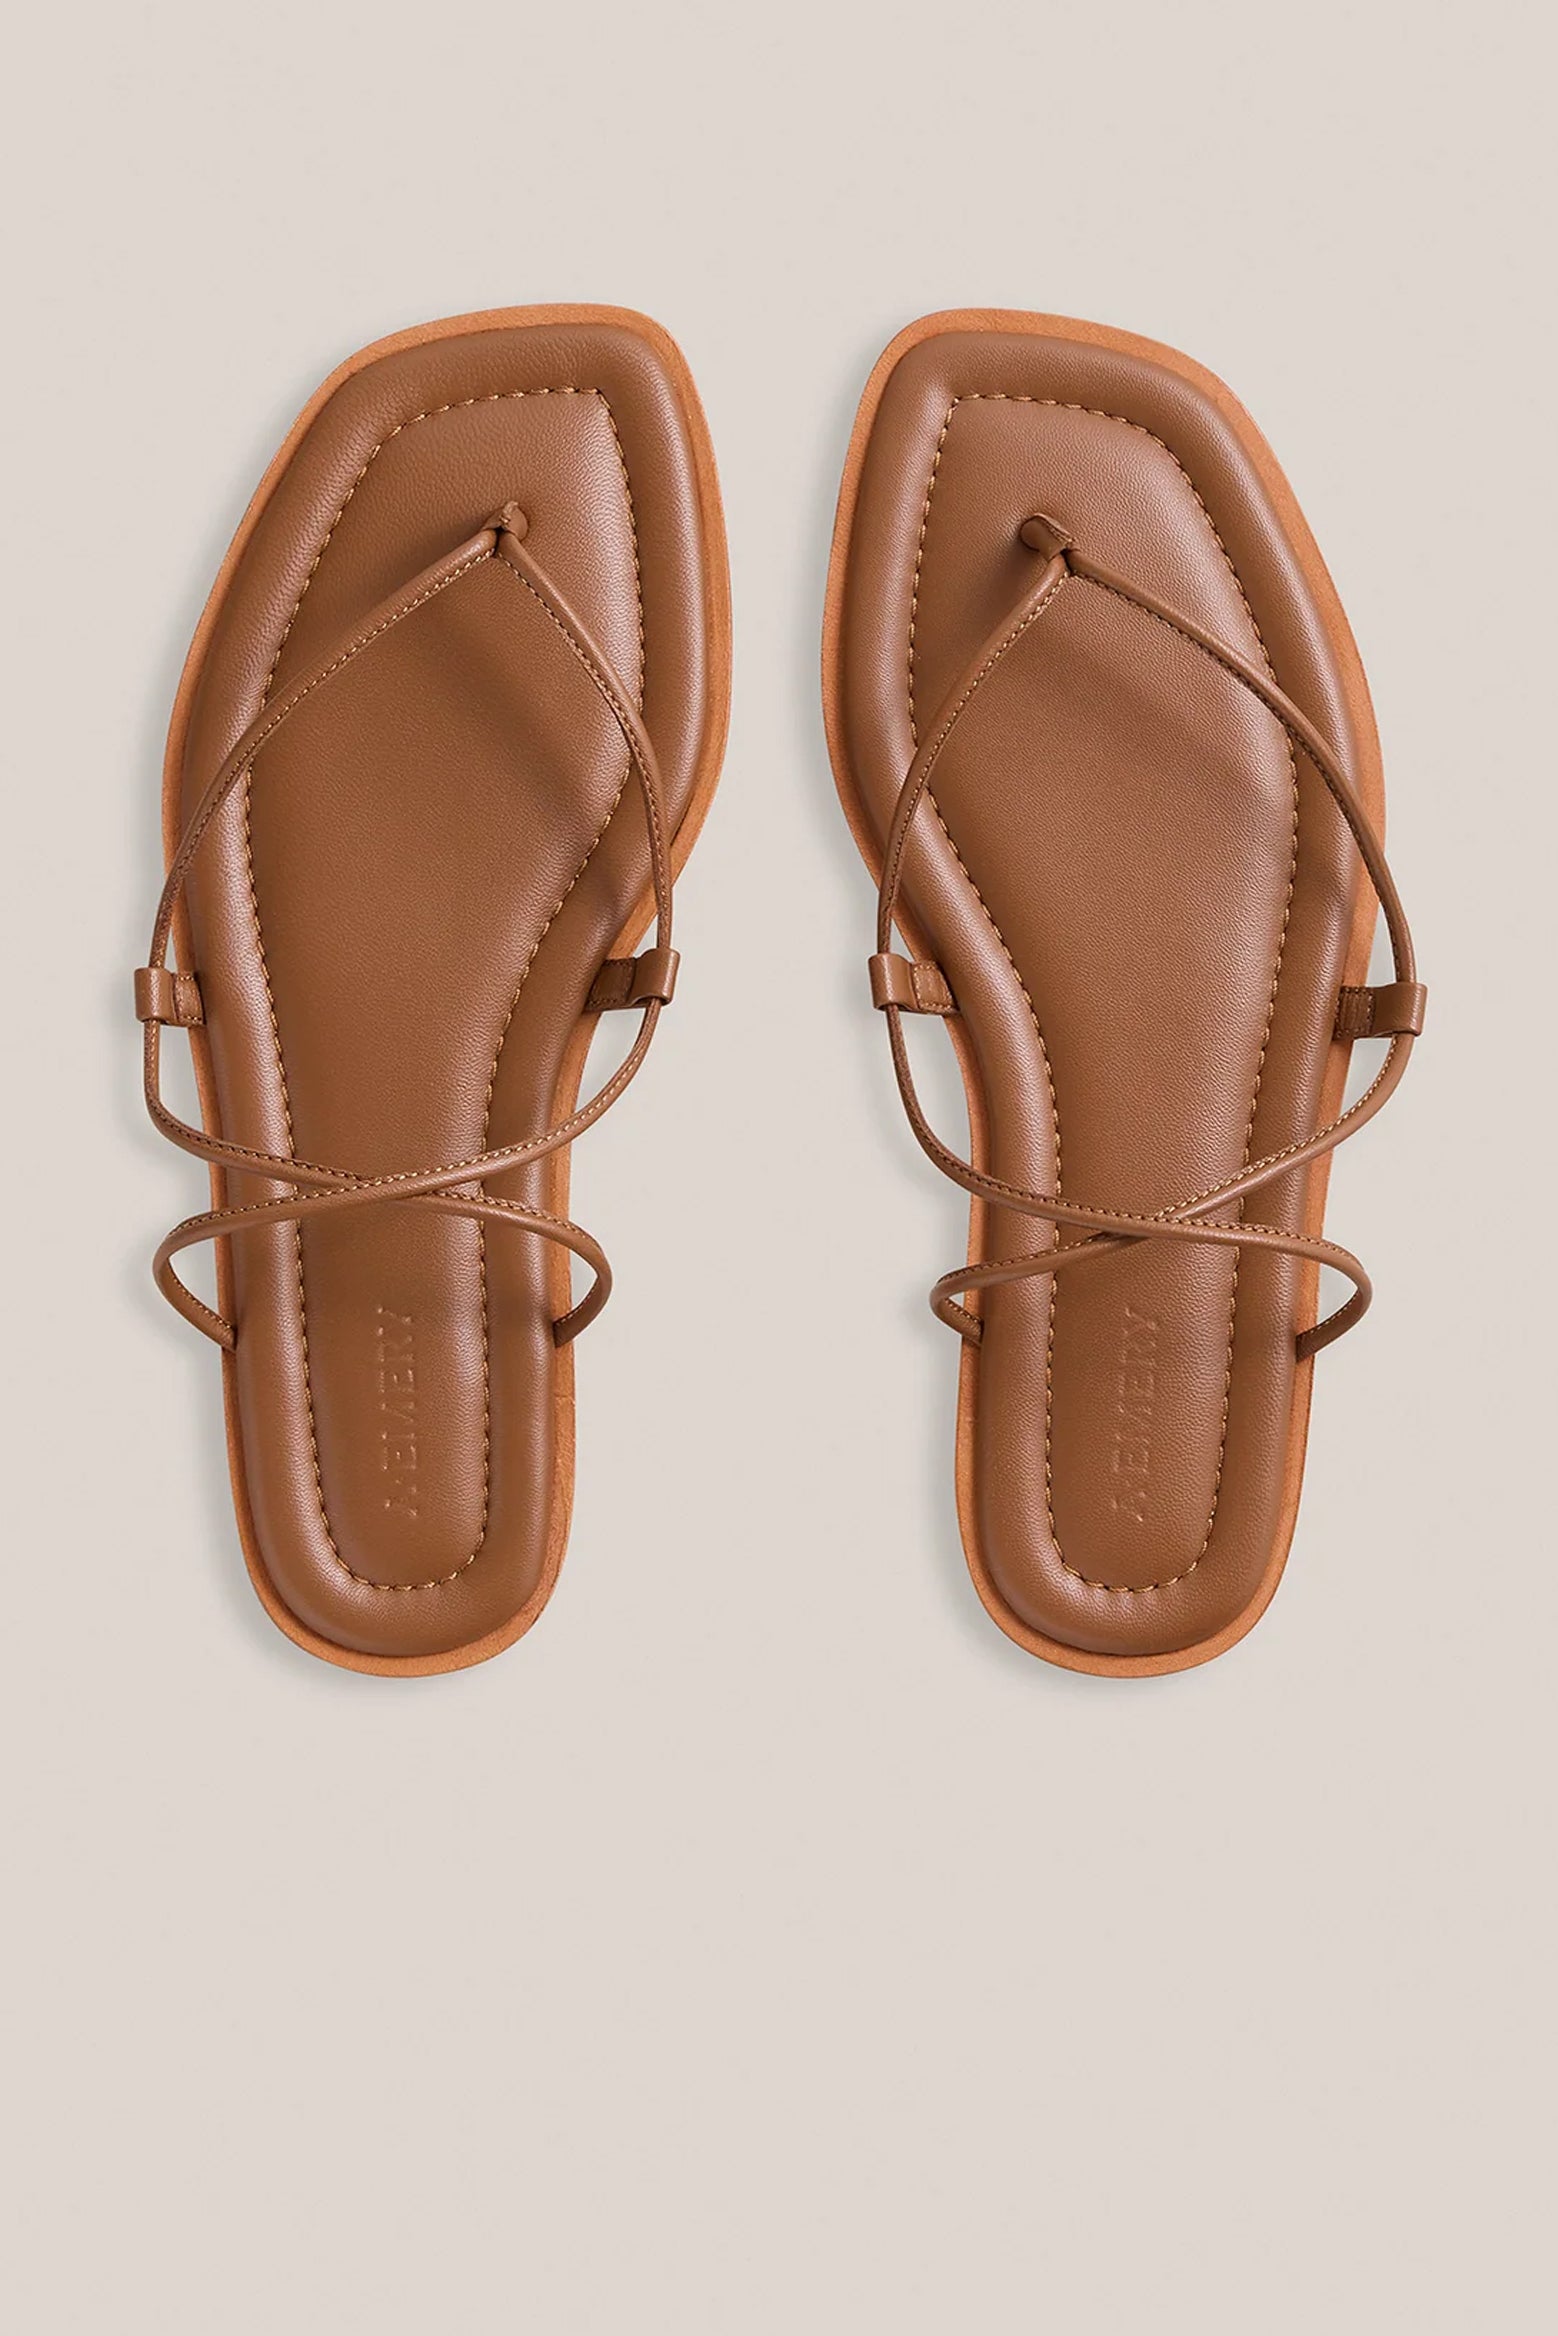 A.Emery Nodi Sandal in Deep Tan available at The New Trend Australia.